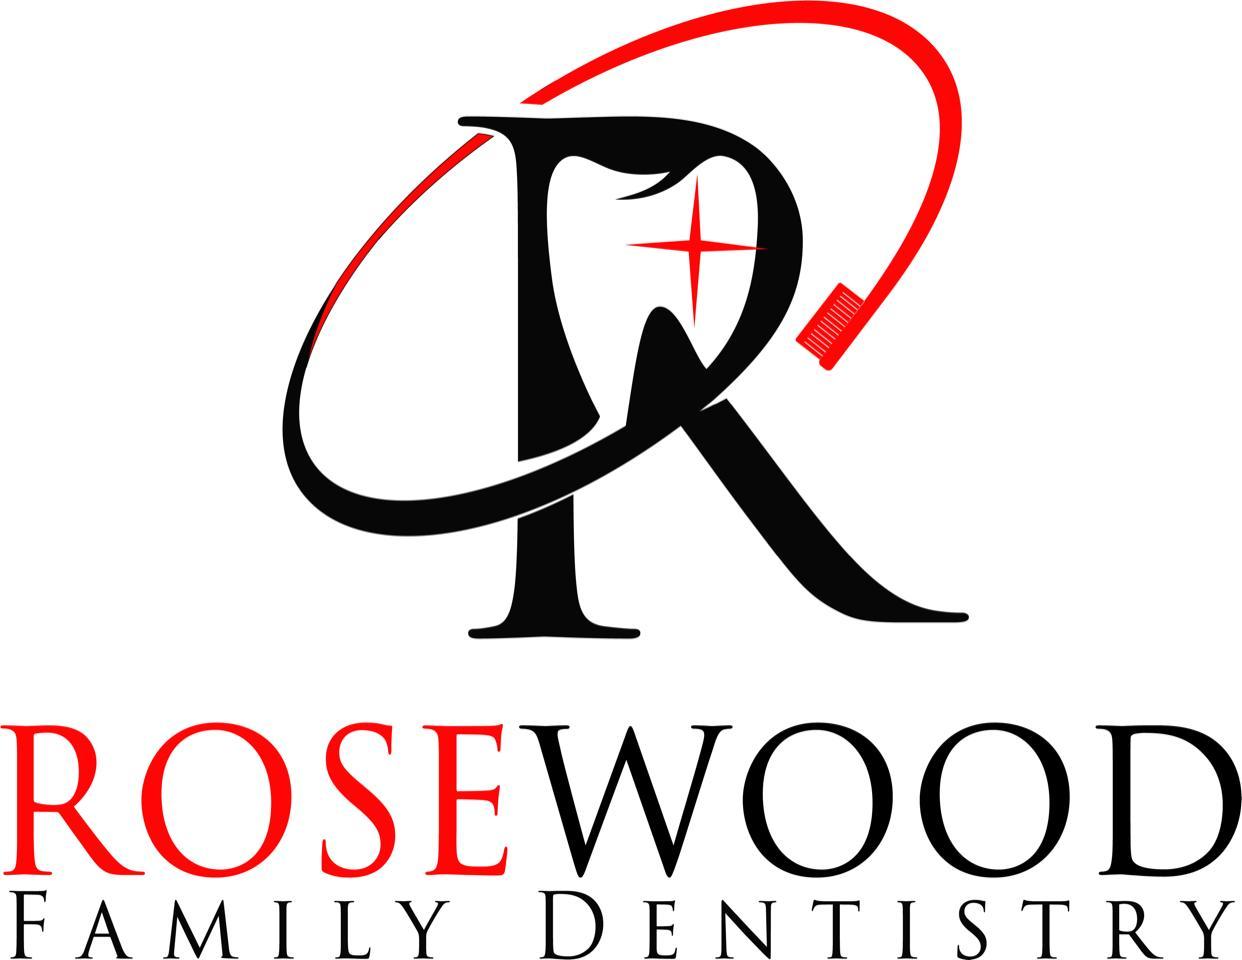 Rosewood Family Dentistry